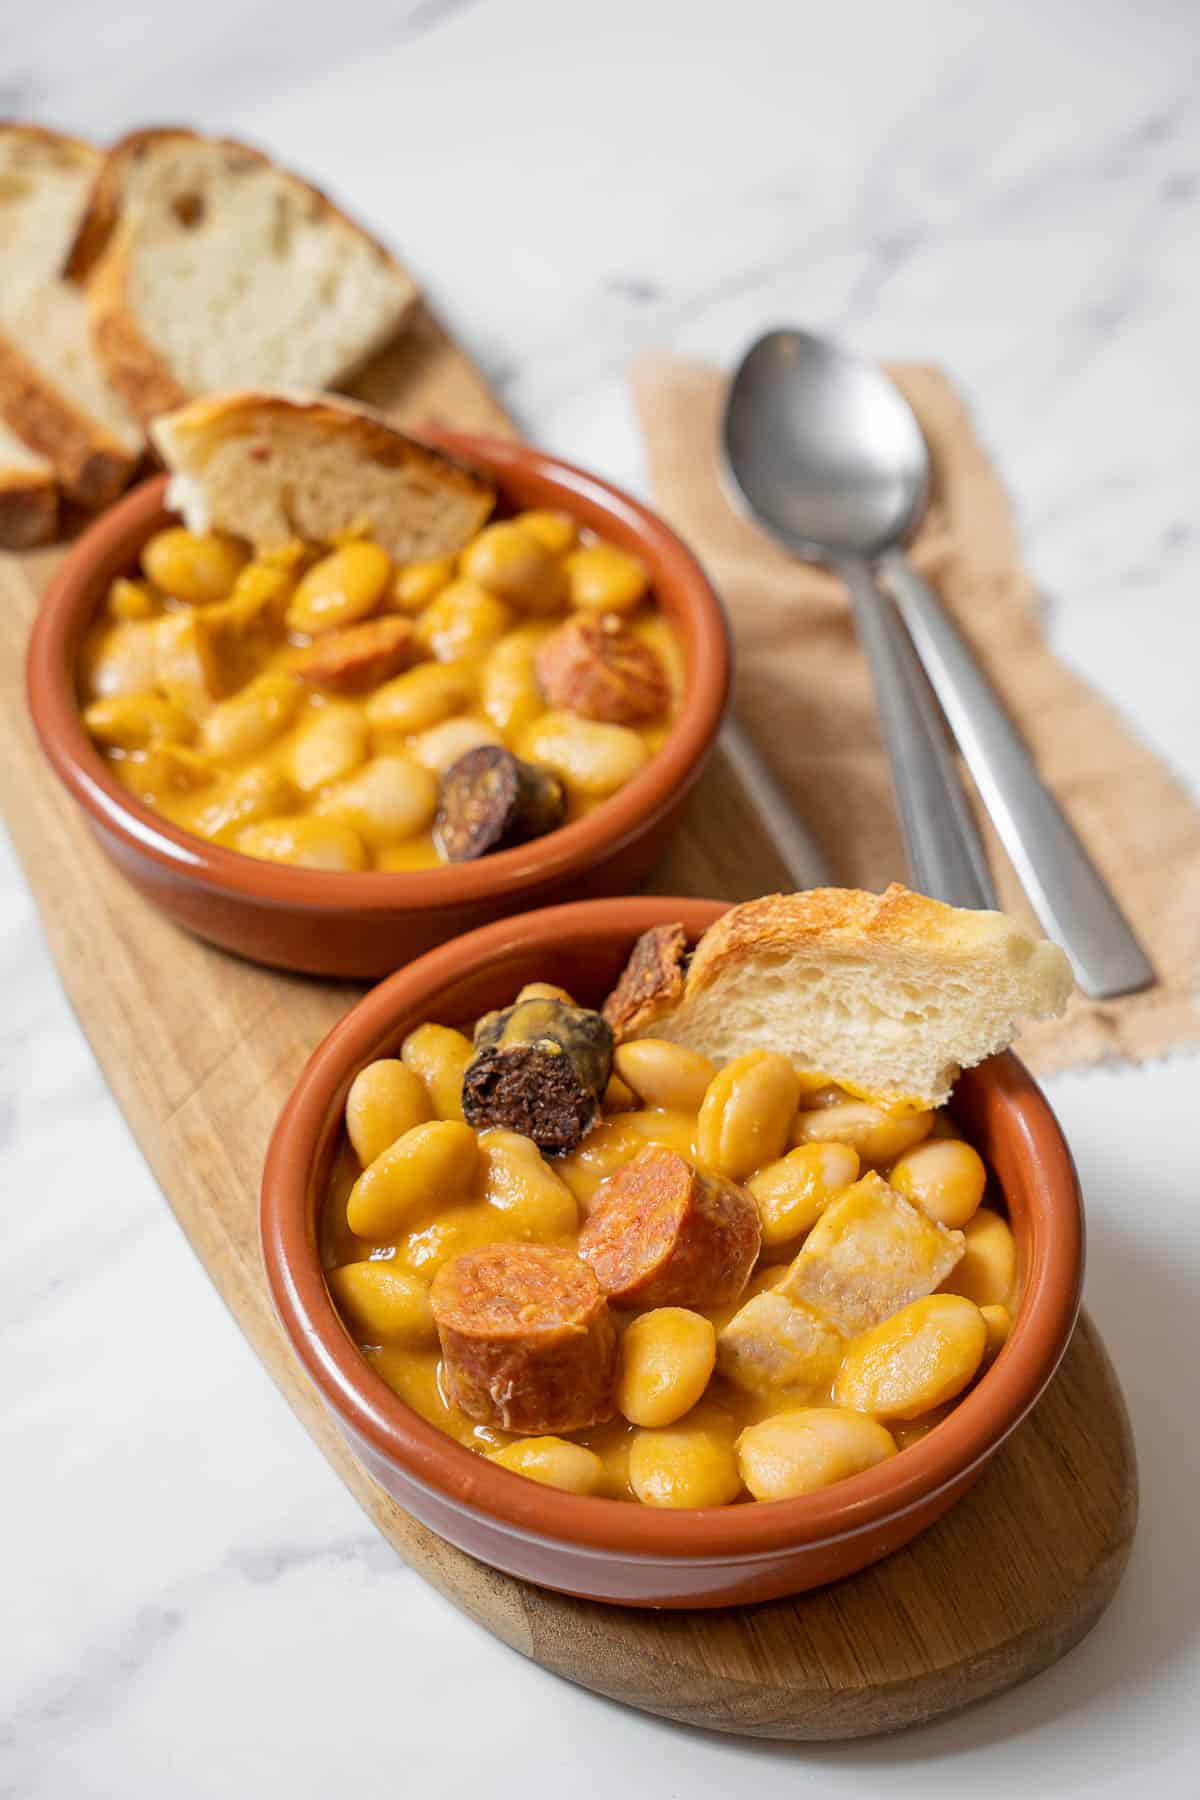 bowls of fabada with sliced bread dipped in.